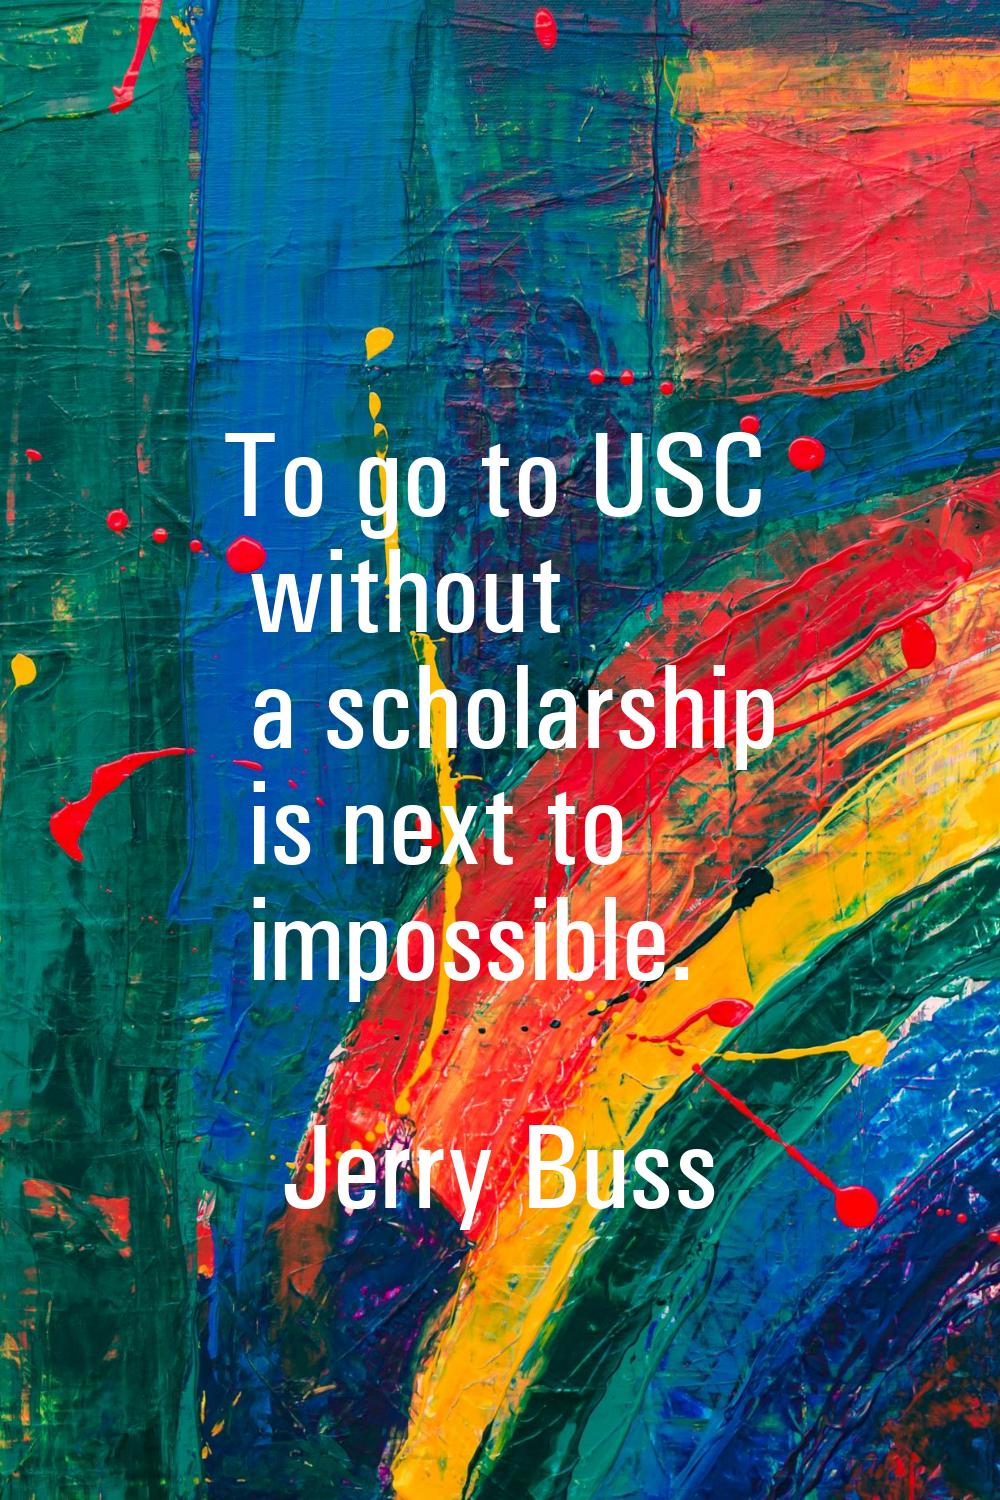 To go to USC without a scholarship is next to impossible.